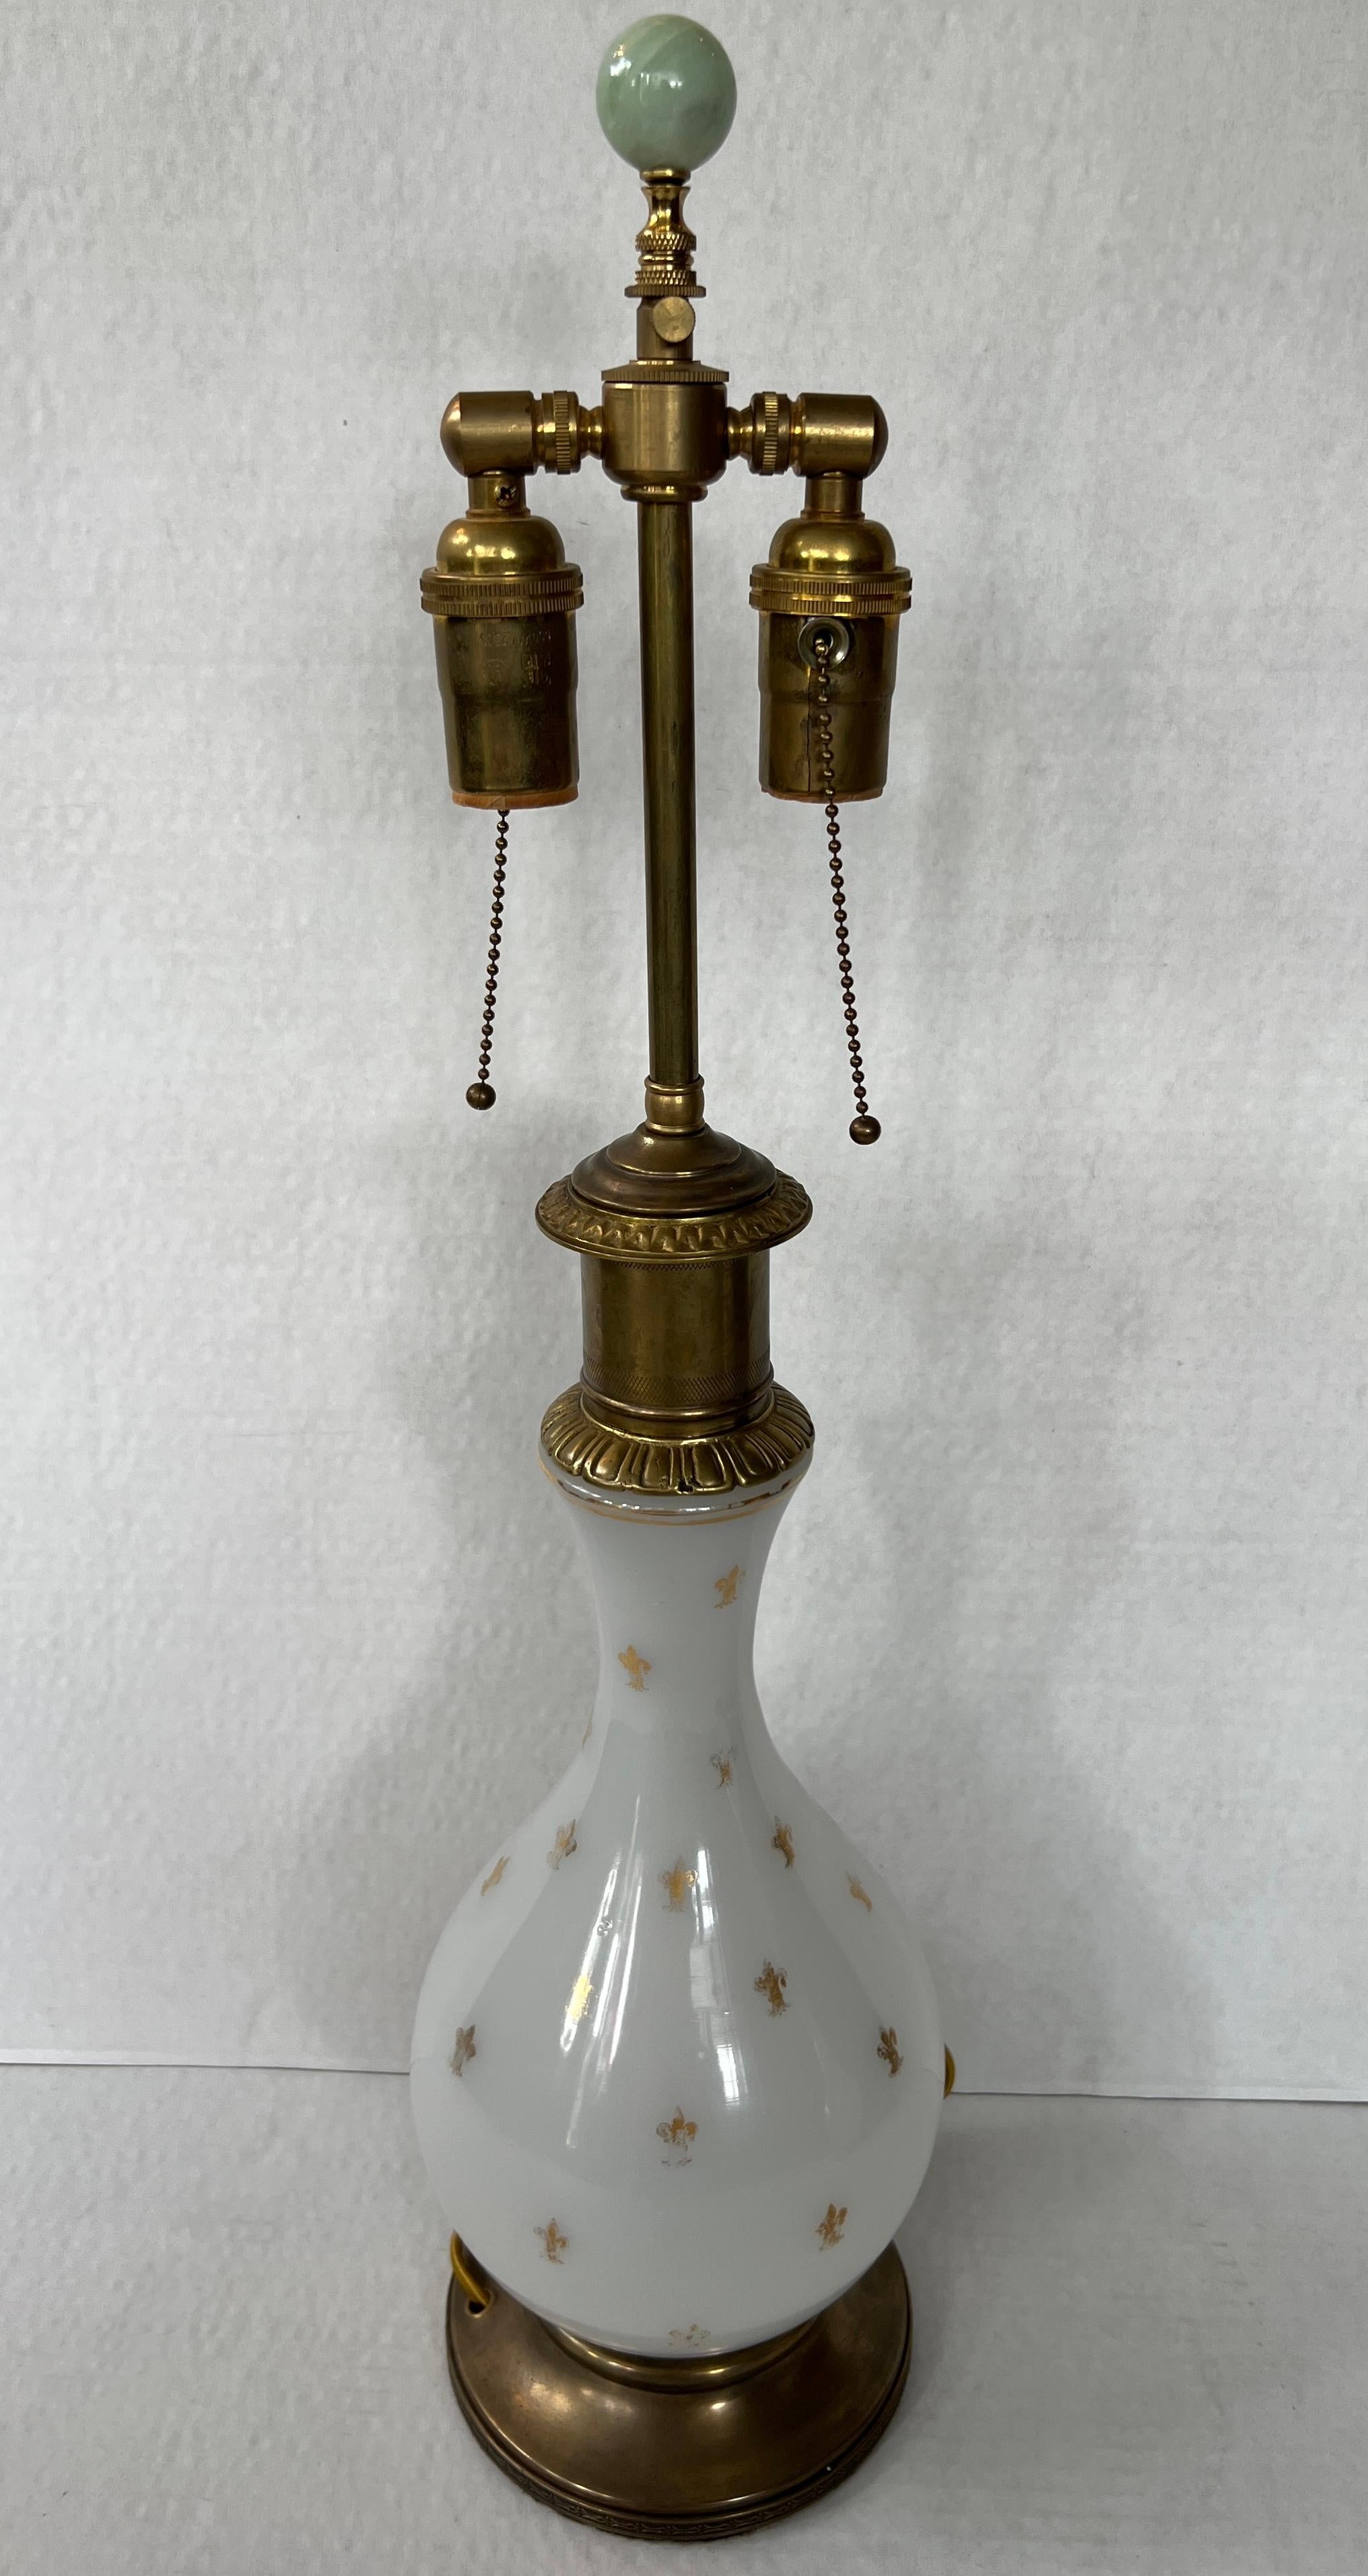 A pair of 1920s table lamps adorned with opaline glass and distinguished by gilded Fleure de Lis detailing.